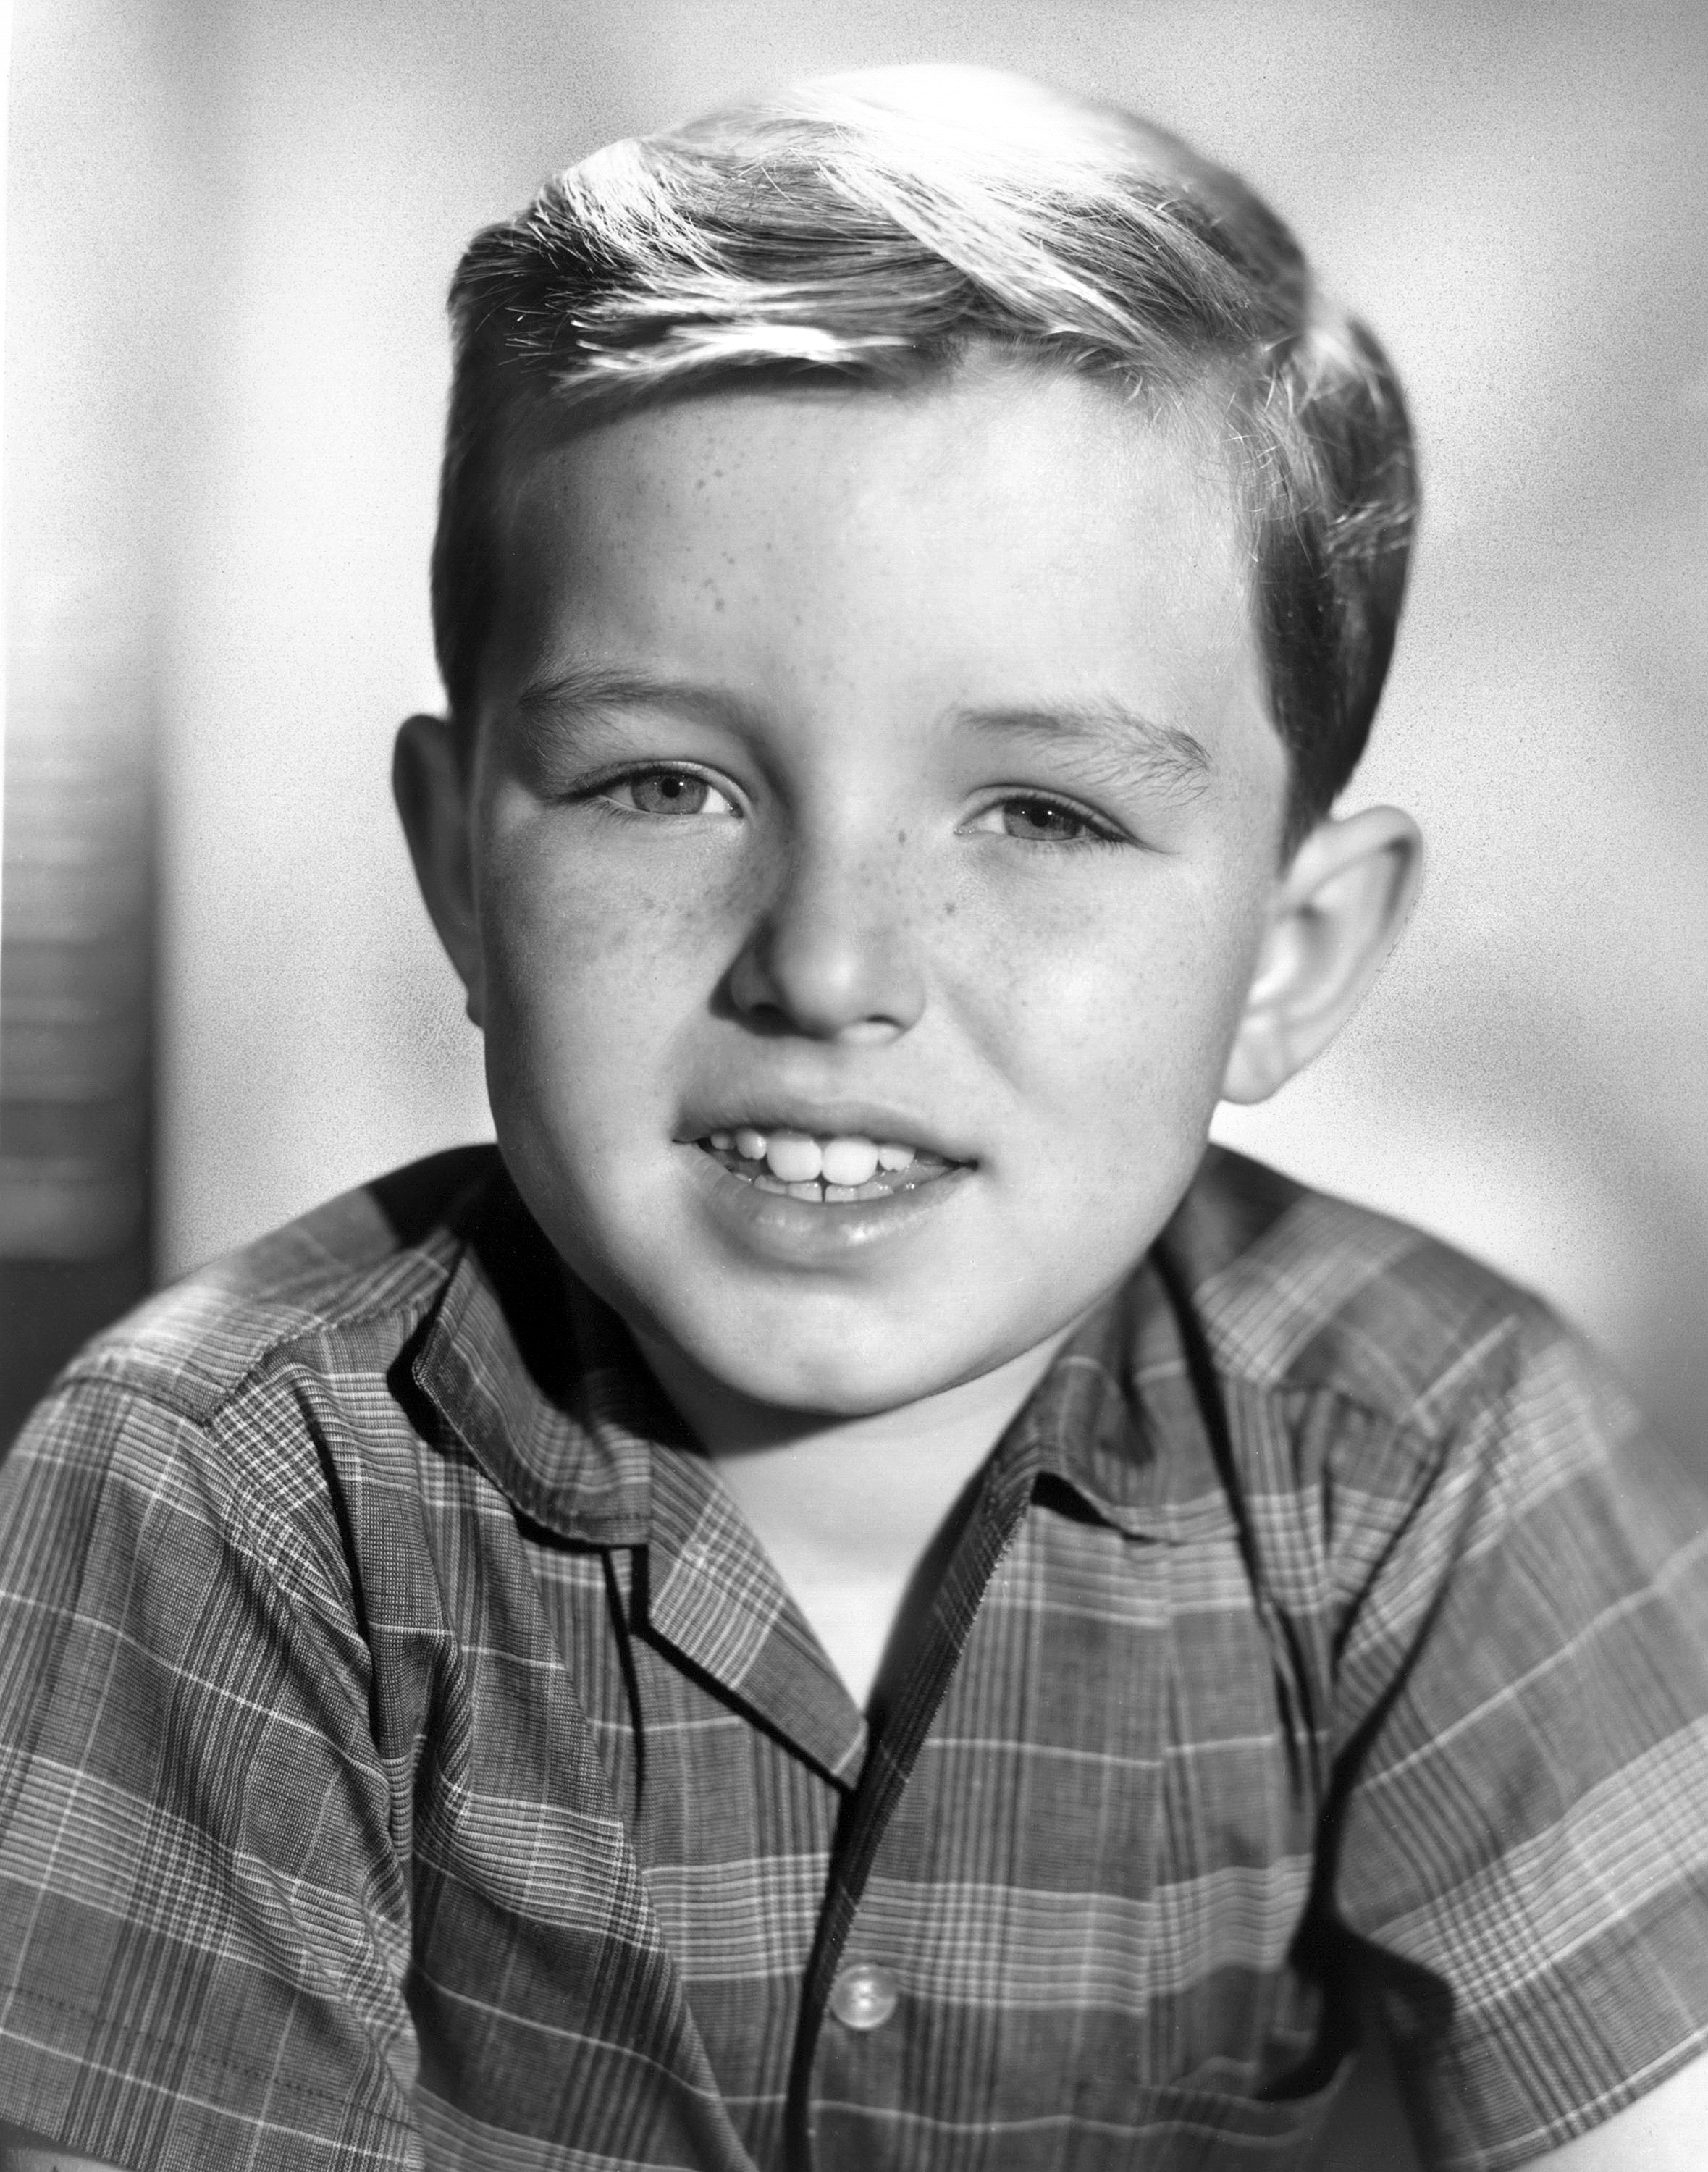 Jerry Mathers as  Beaver 'Theodore' Cleaver in "Leave It to Beaver" in Los Angeles, 1957 | Source: Getty Images